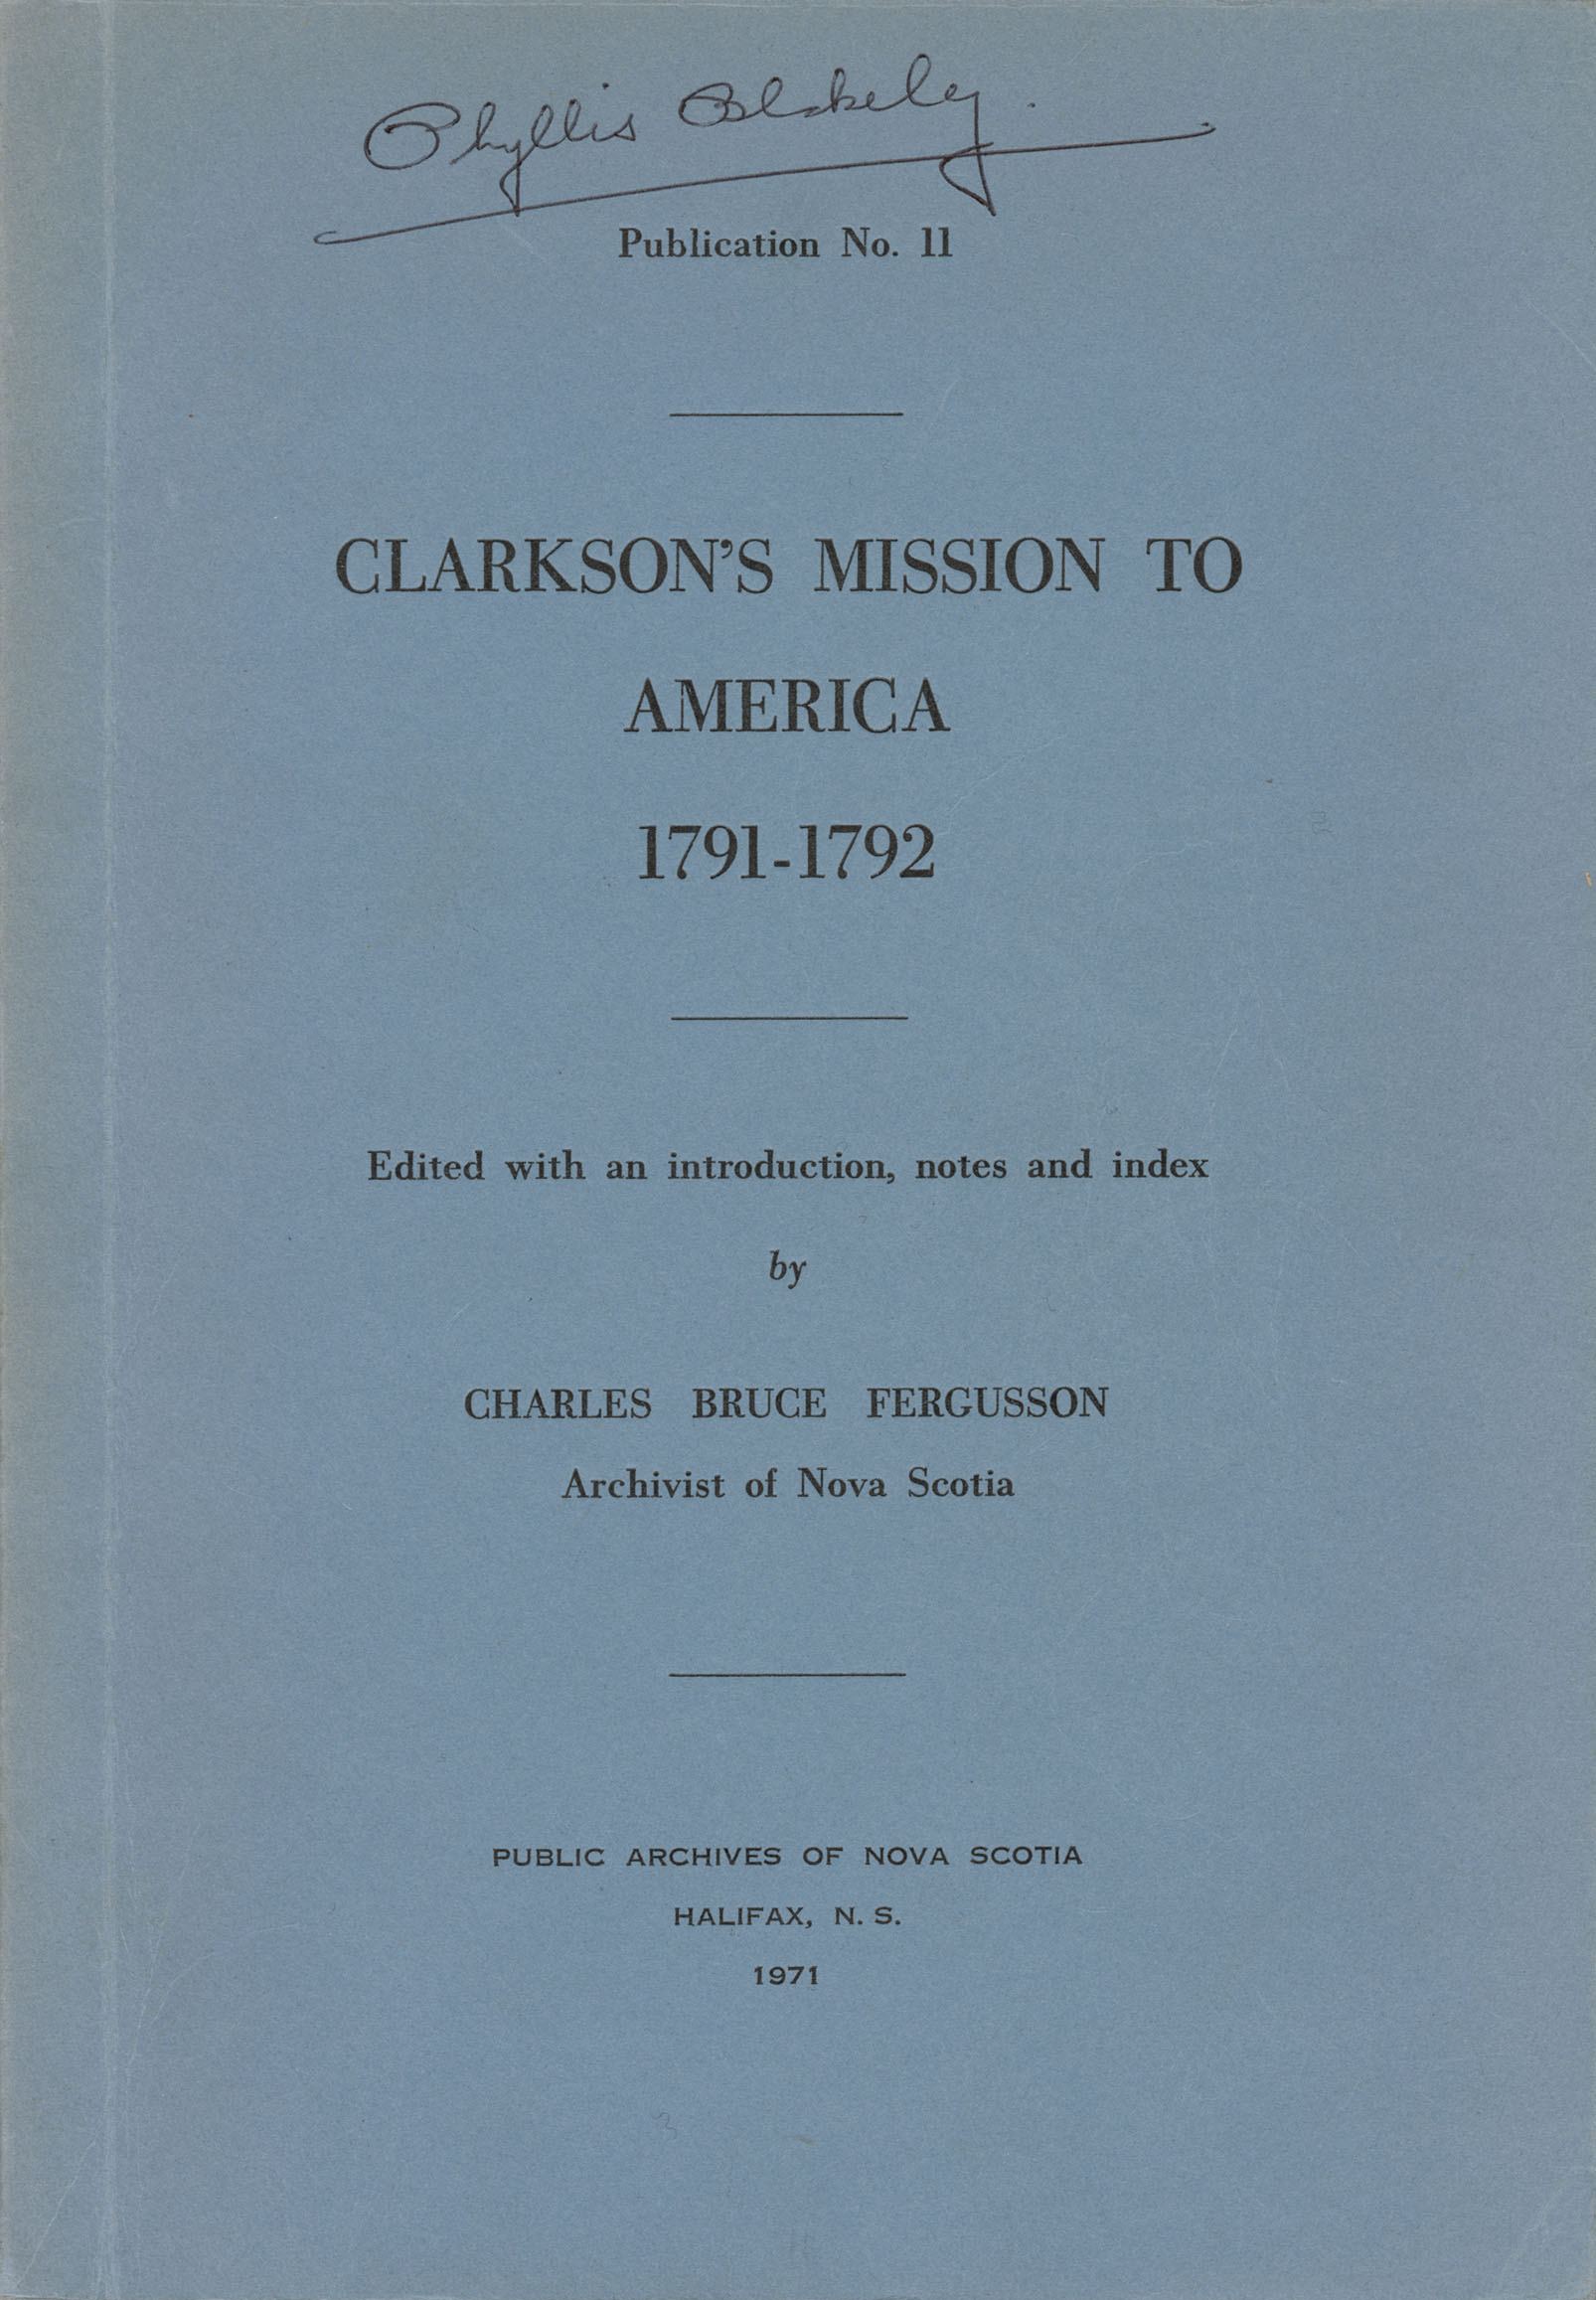 Clarkson's Mission to America, 1791-1792